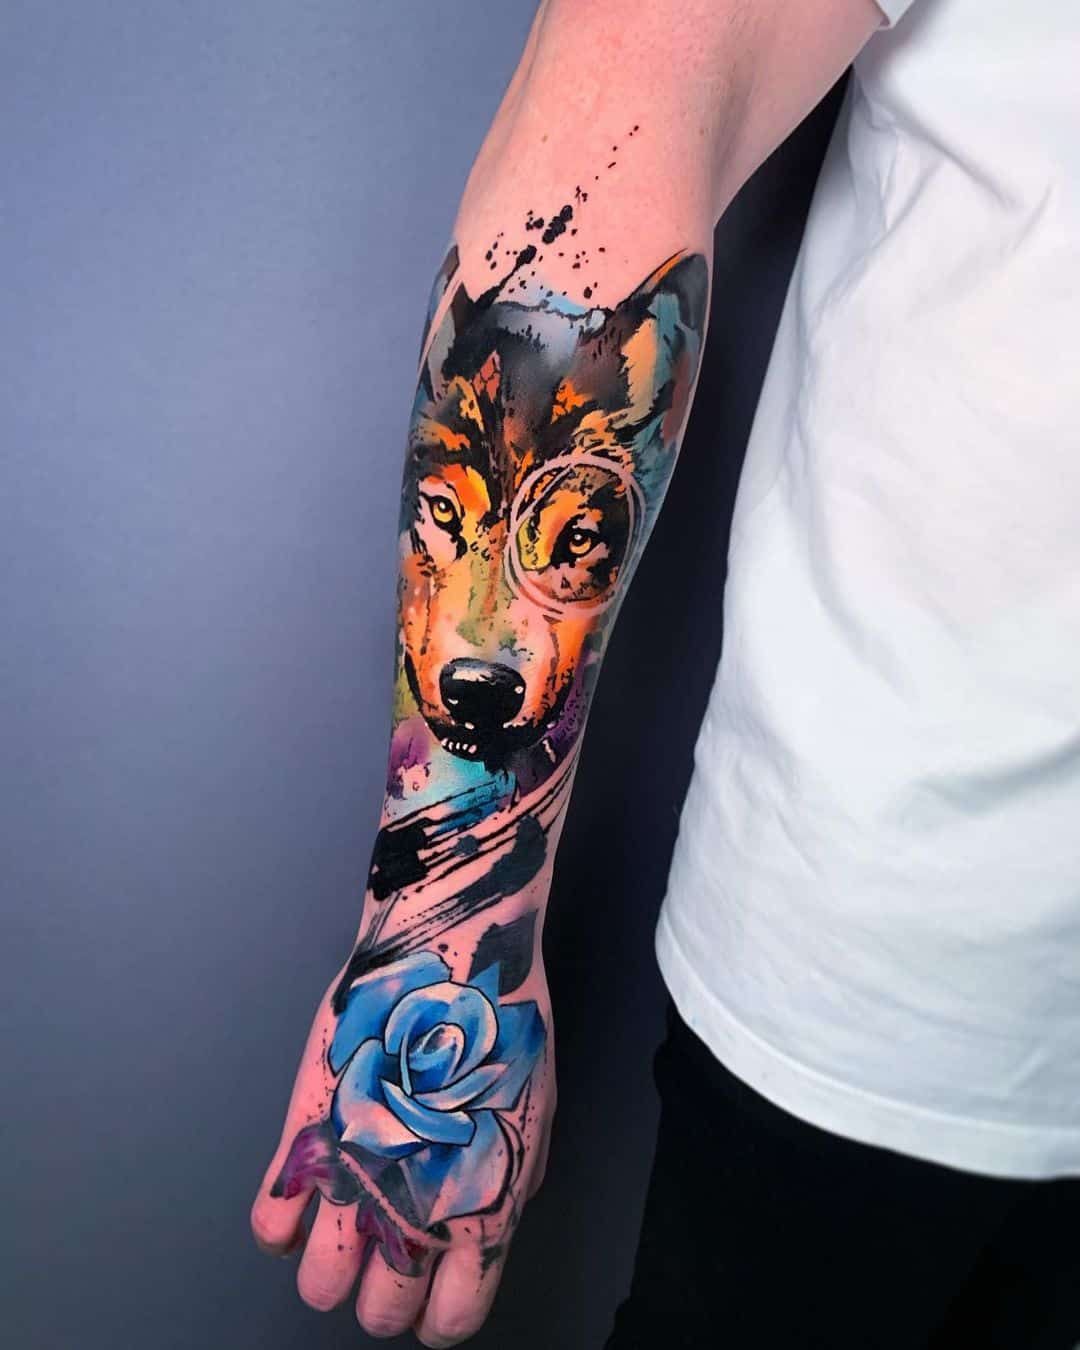 pablo ortiz tattoo water color wolf tattoo on forearm